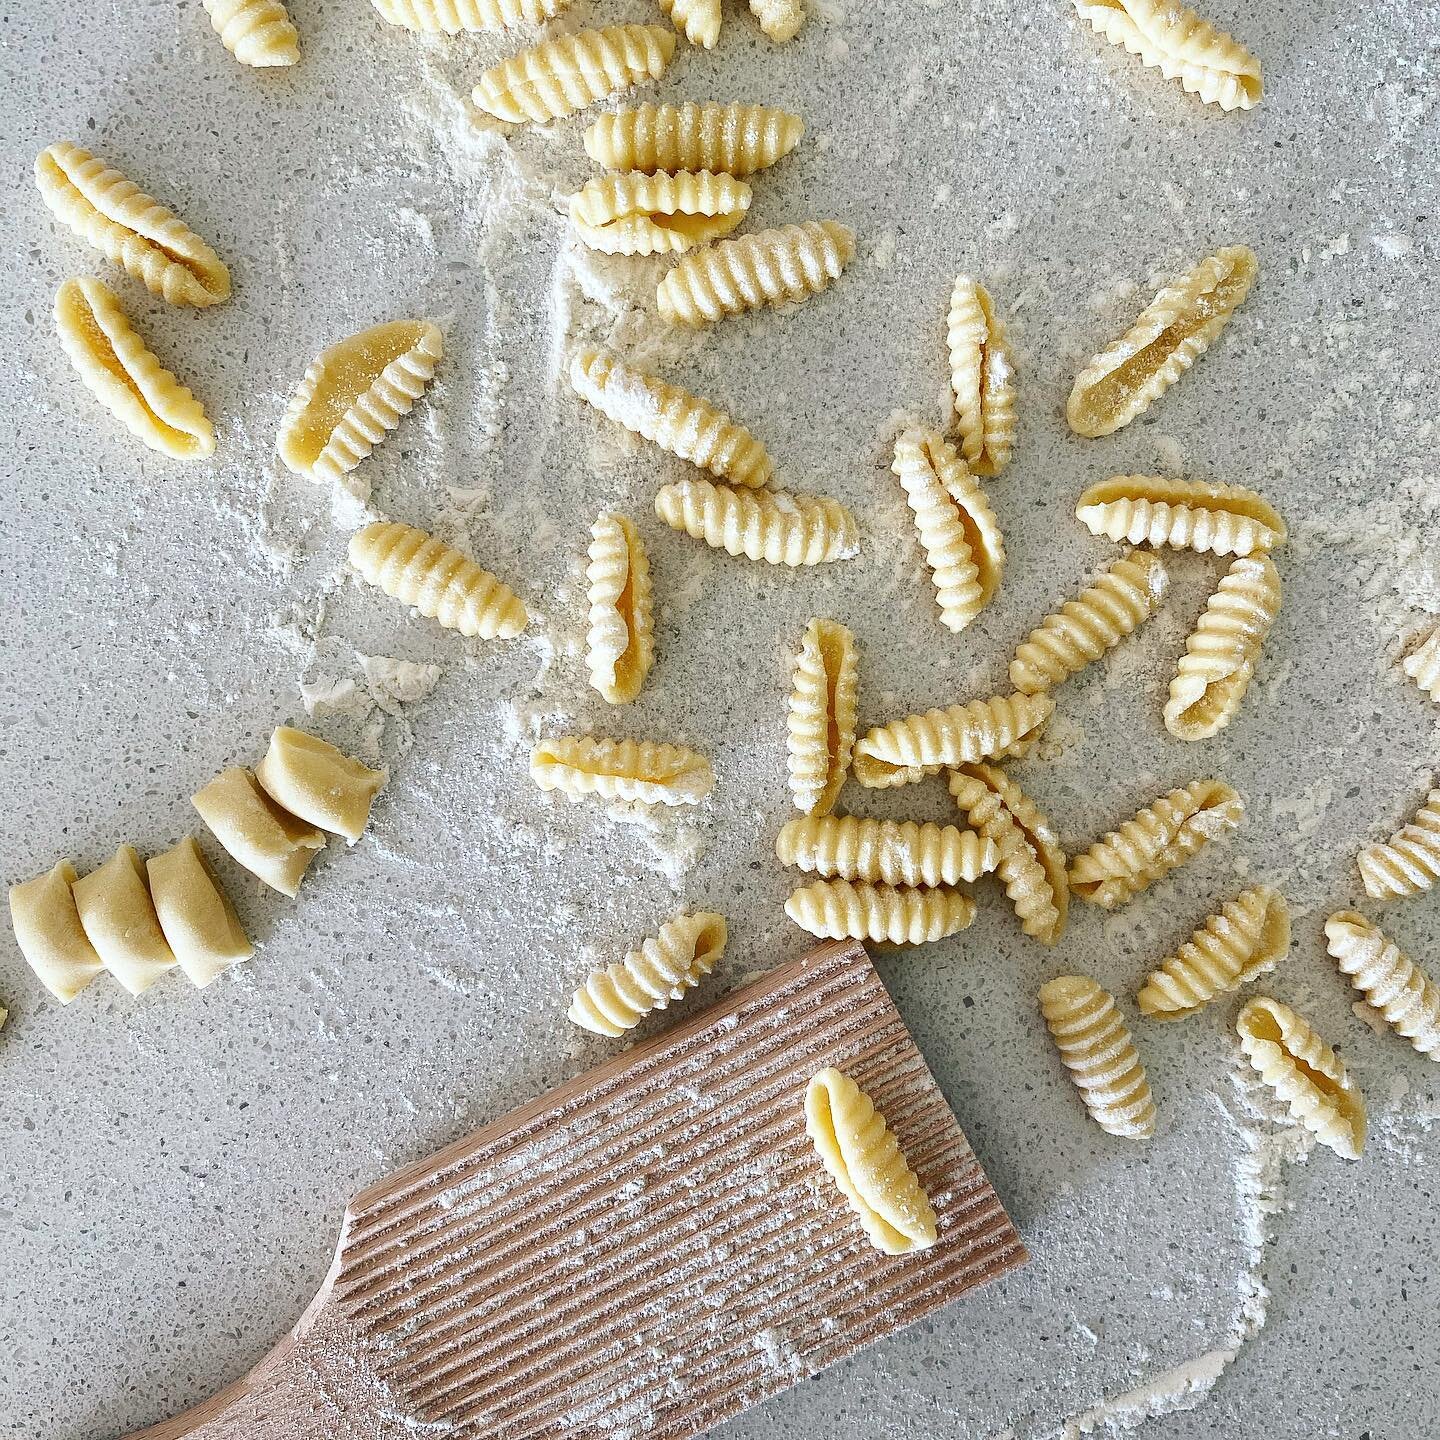 The simplest of ingredients can produce the most delightful of meals💛Hand rolled cavatelli. 
.
.
.
#cavatelli #handrolledpasta #italianfood #pastalover #carbloading #recipedevelopment #foodwriting #fleurieupeninsula